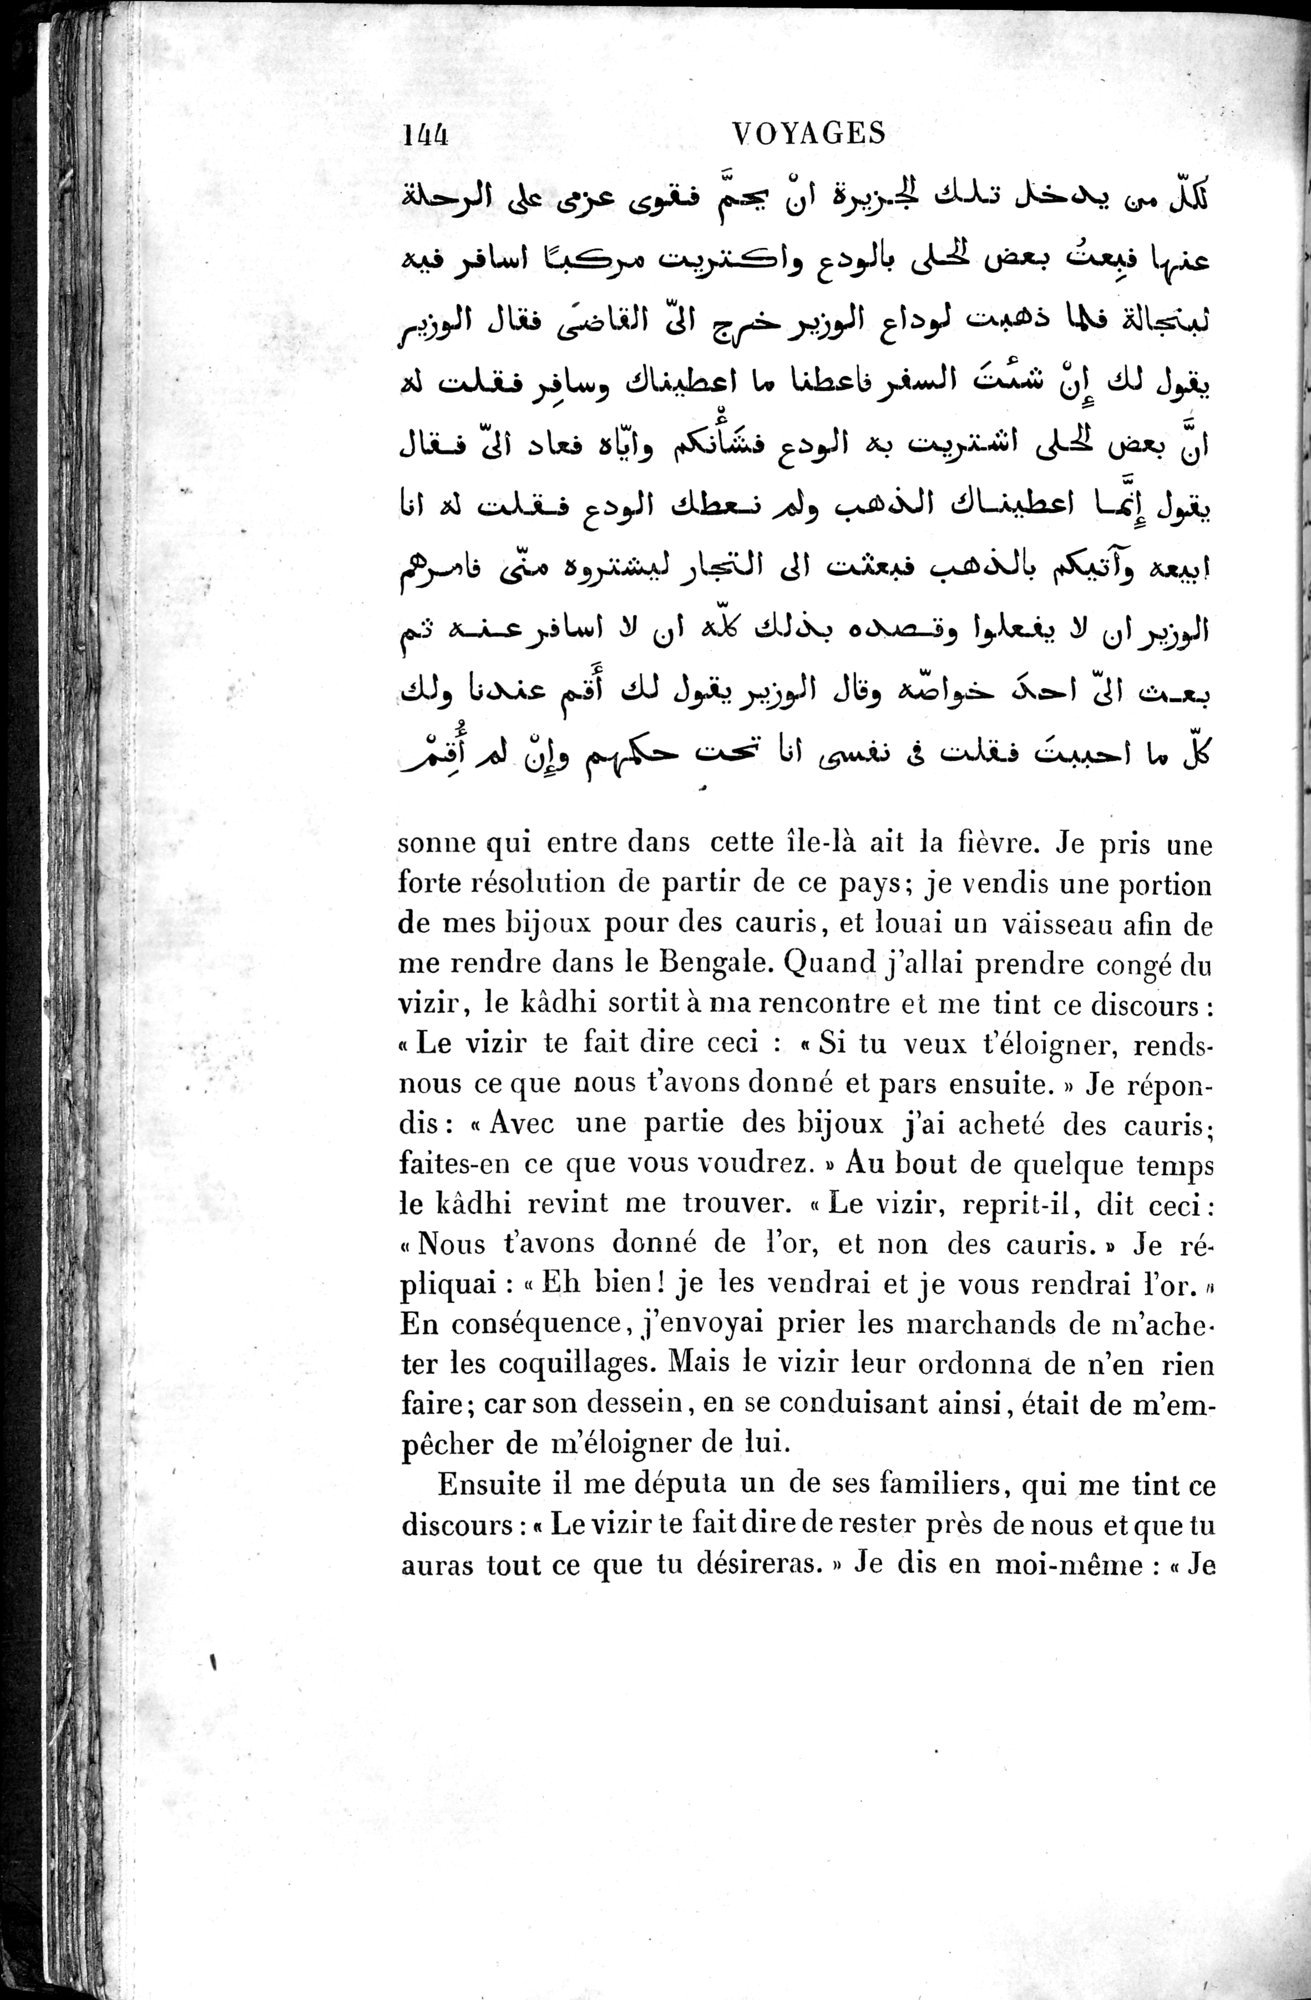 Voyages d'Ibn Batoutah : vol.4 / Page 156 (Grayscale High Resolution Image)